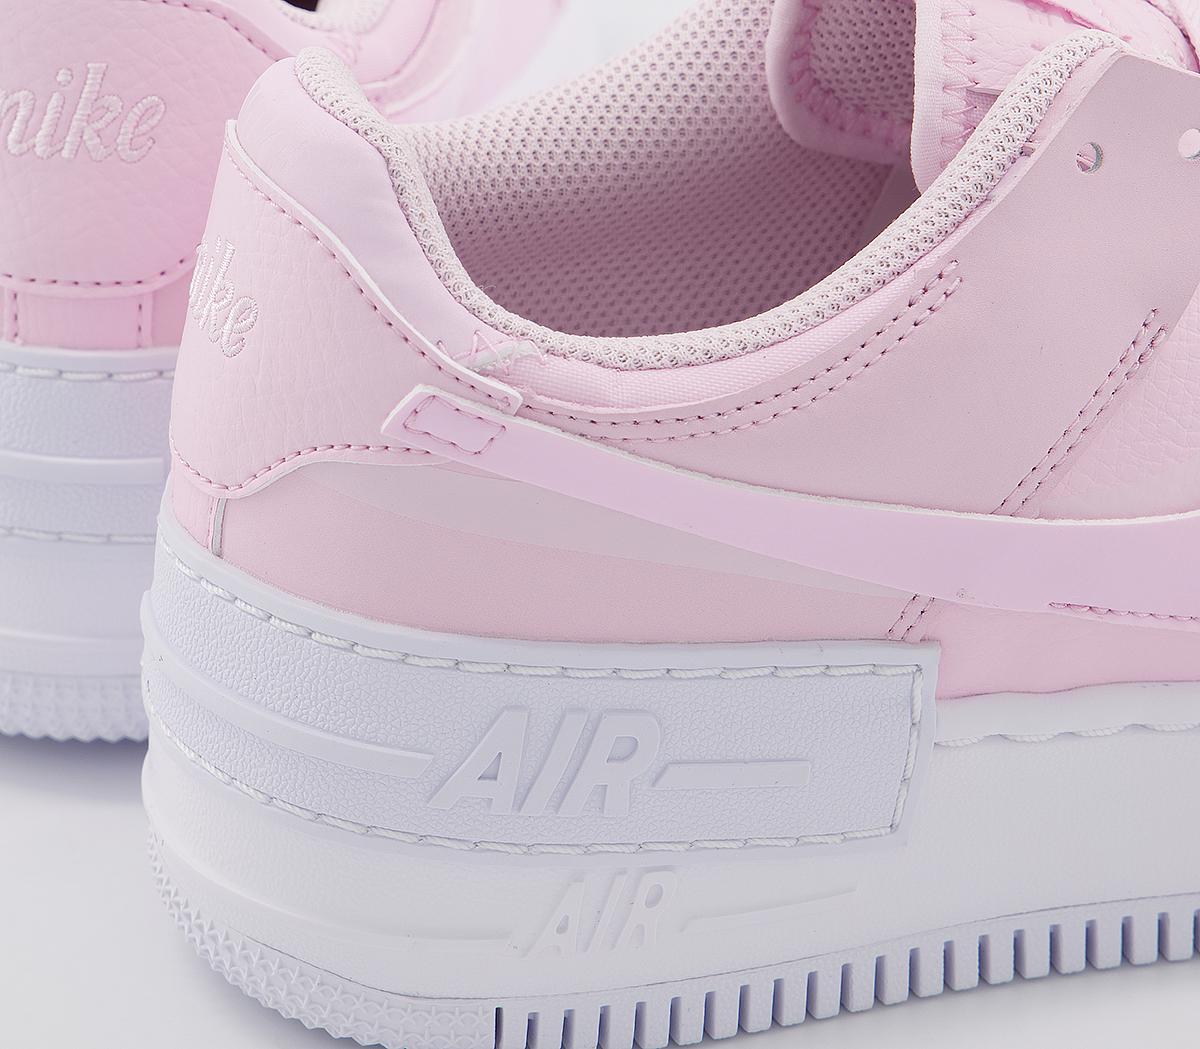 Nike Air Force 1 Shadow Trainers Pink Foam White - Women's Trainers